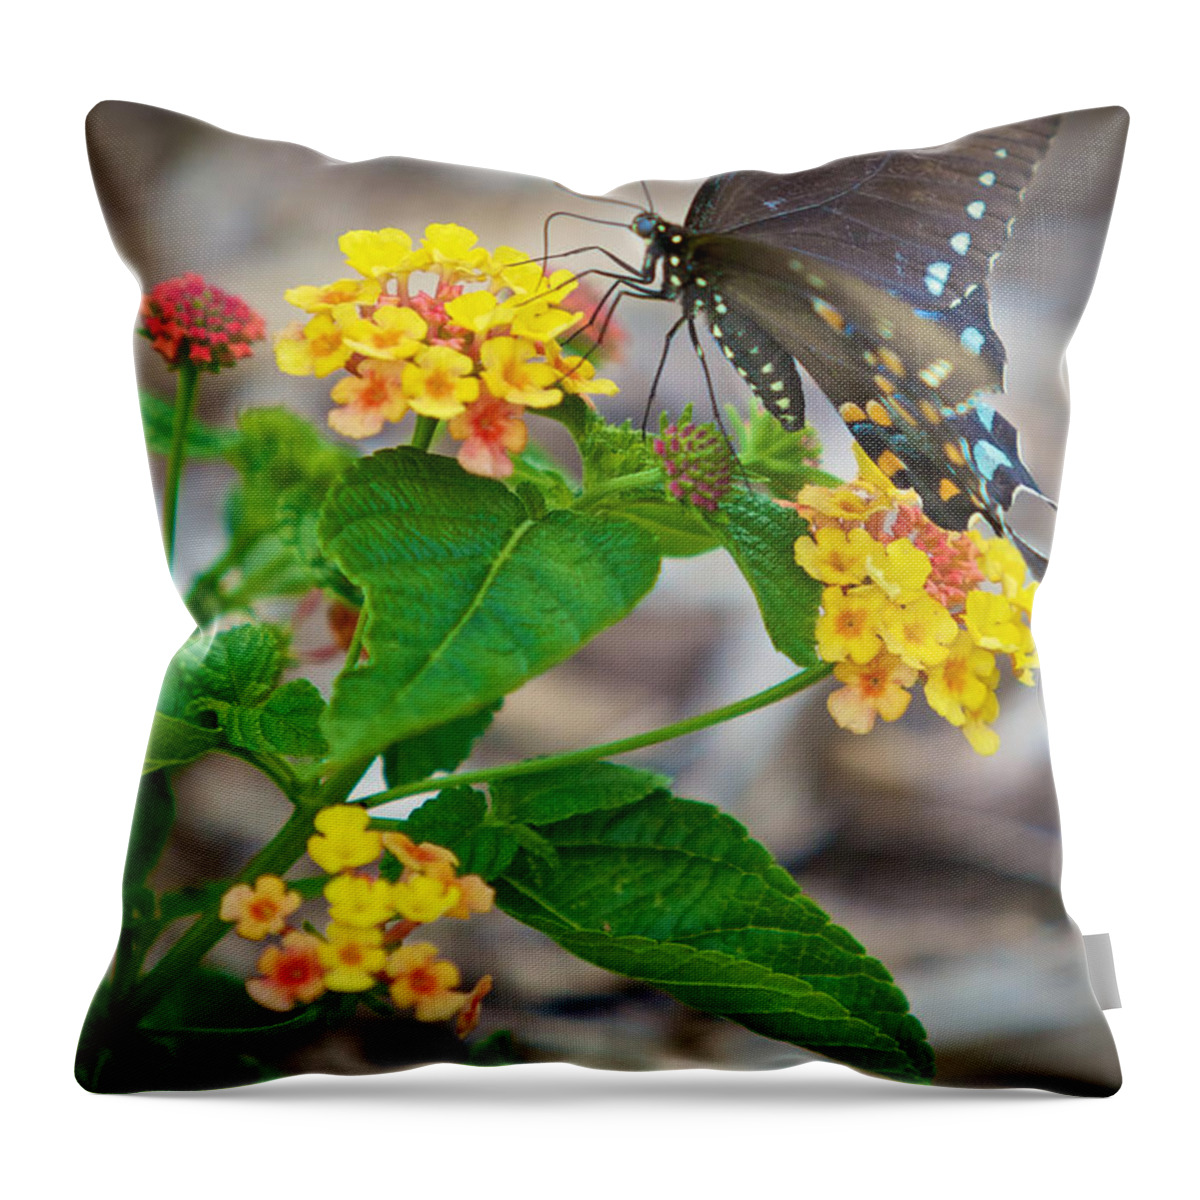 Butterfly Throw Pillow featuring the photograph Butterfly by John Daly